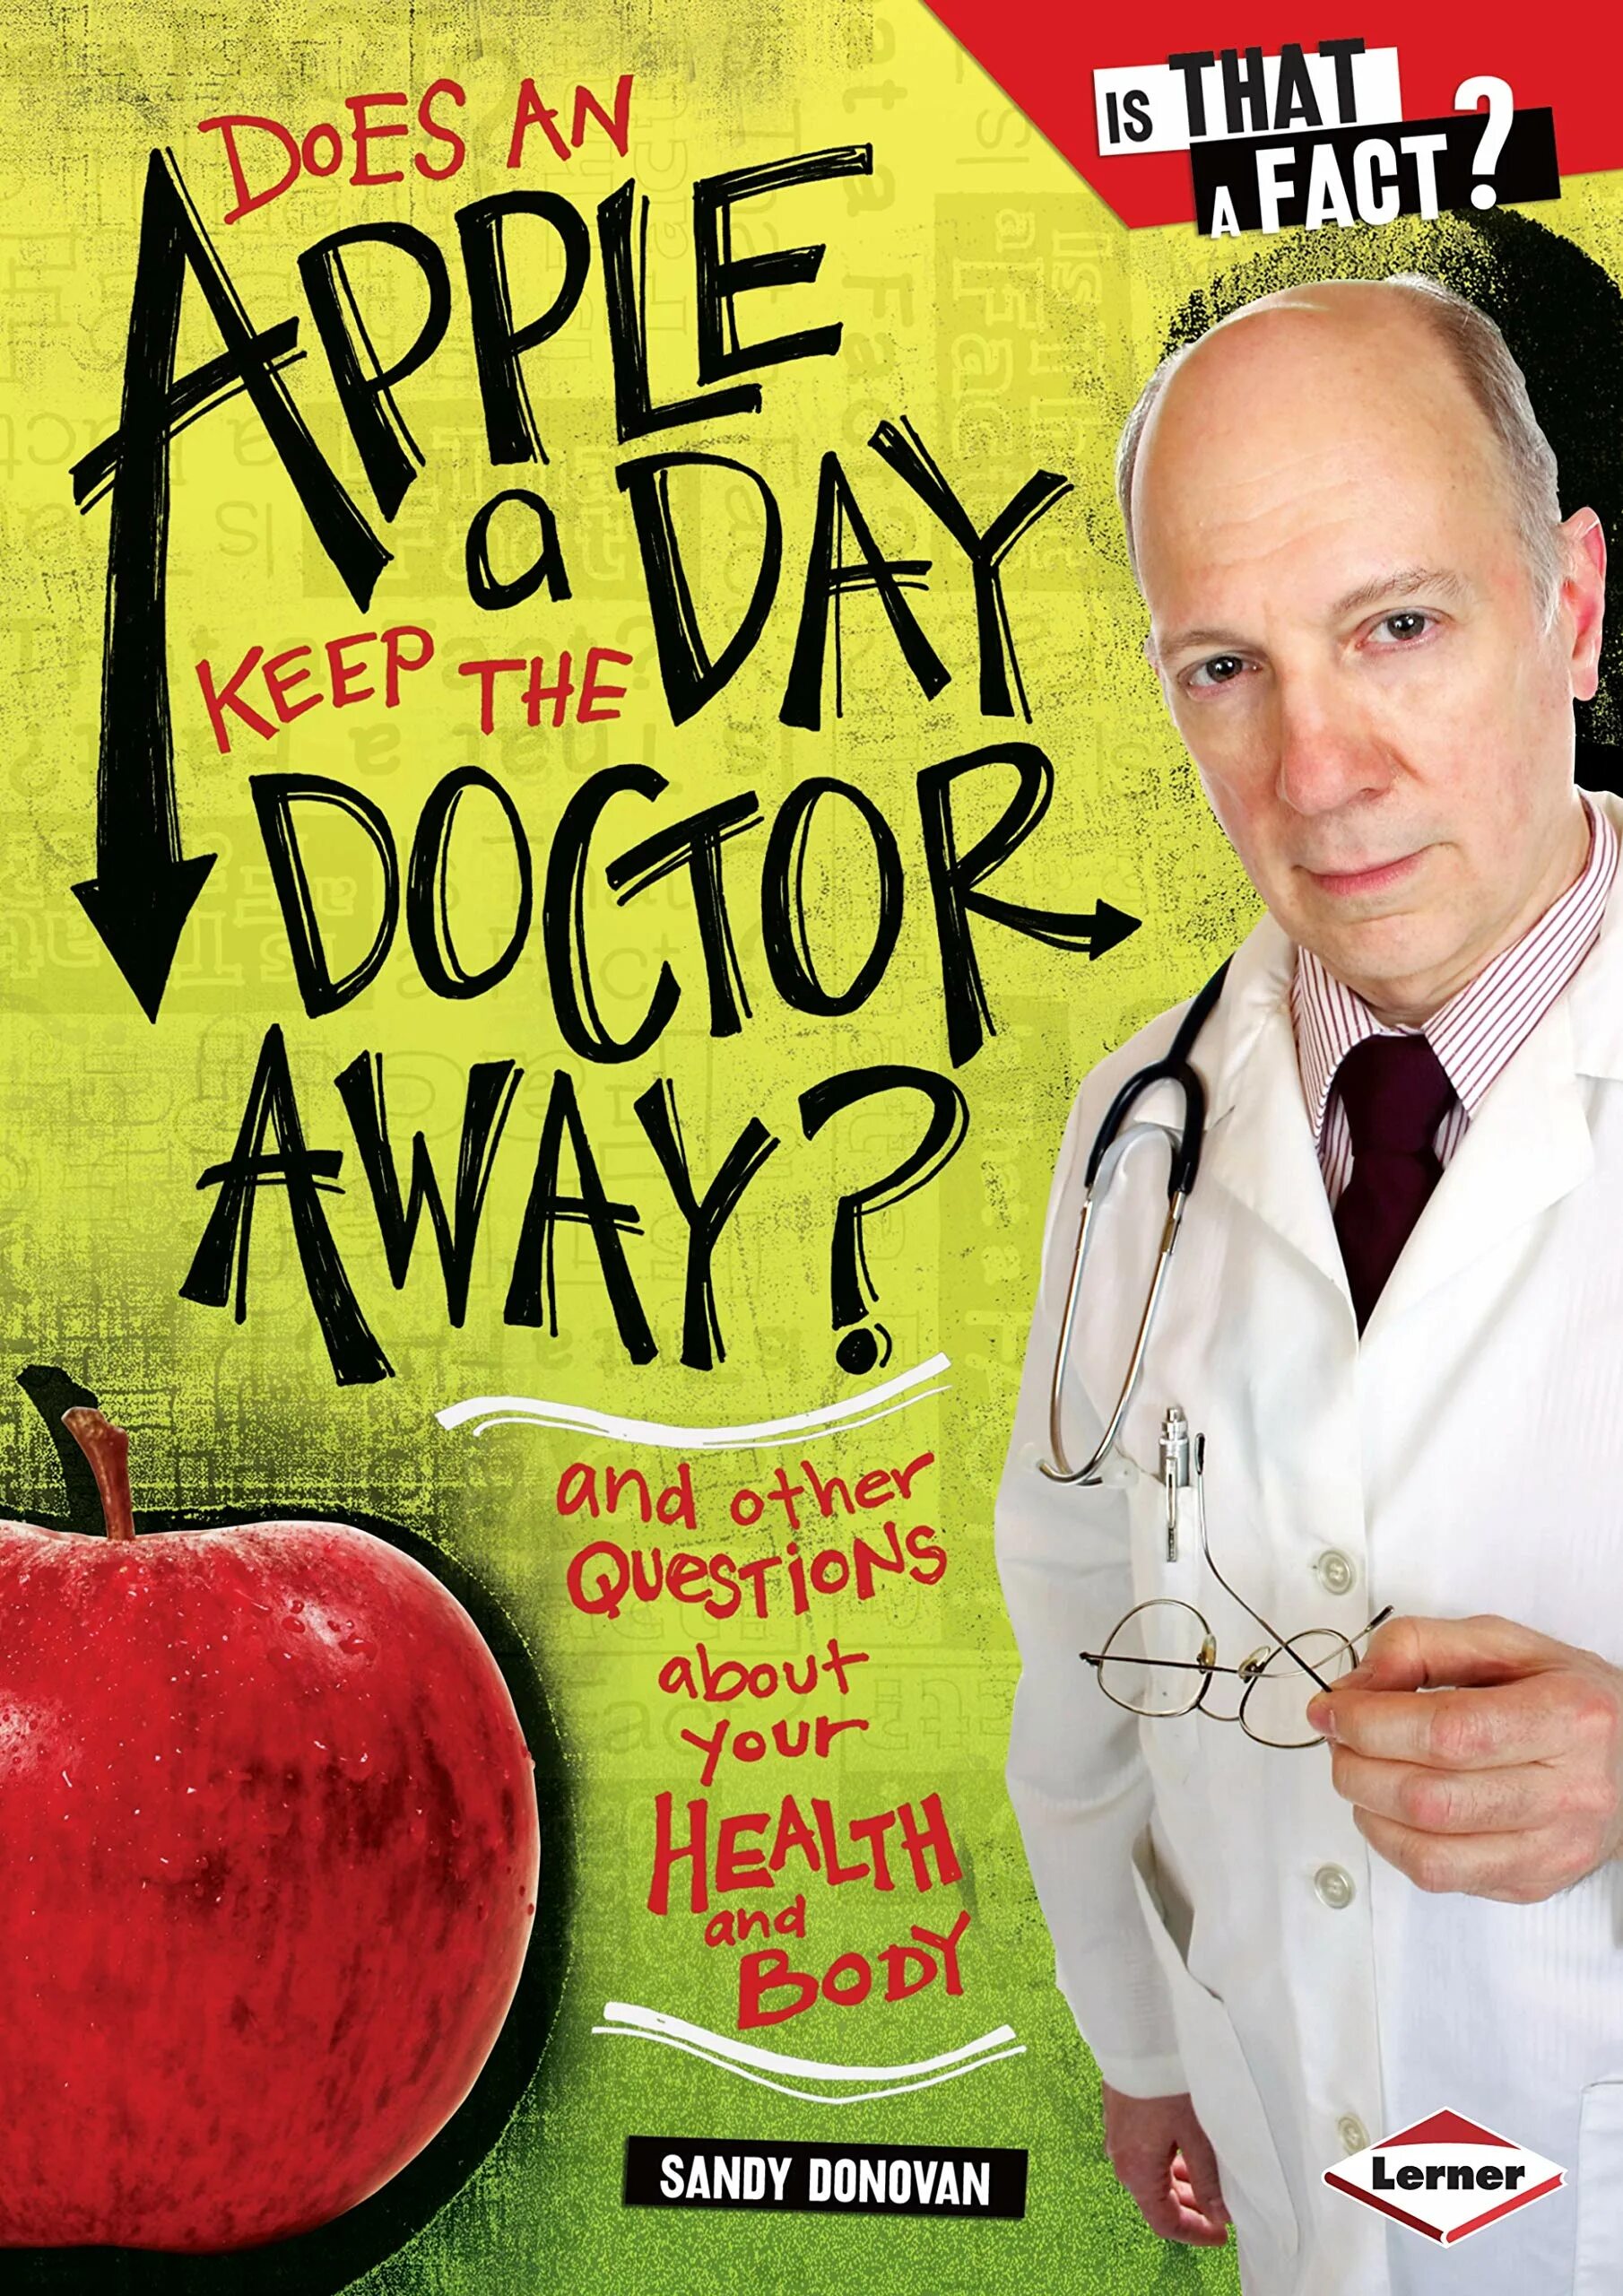 An a day keeps the doctor away. Apple Day. An Apple a Day keeps the Doctor away. Sandy Donovan. One Apple a Day keeps Doctors away.